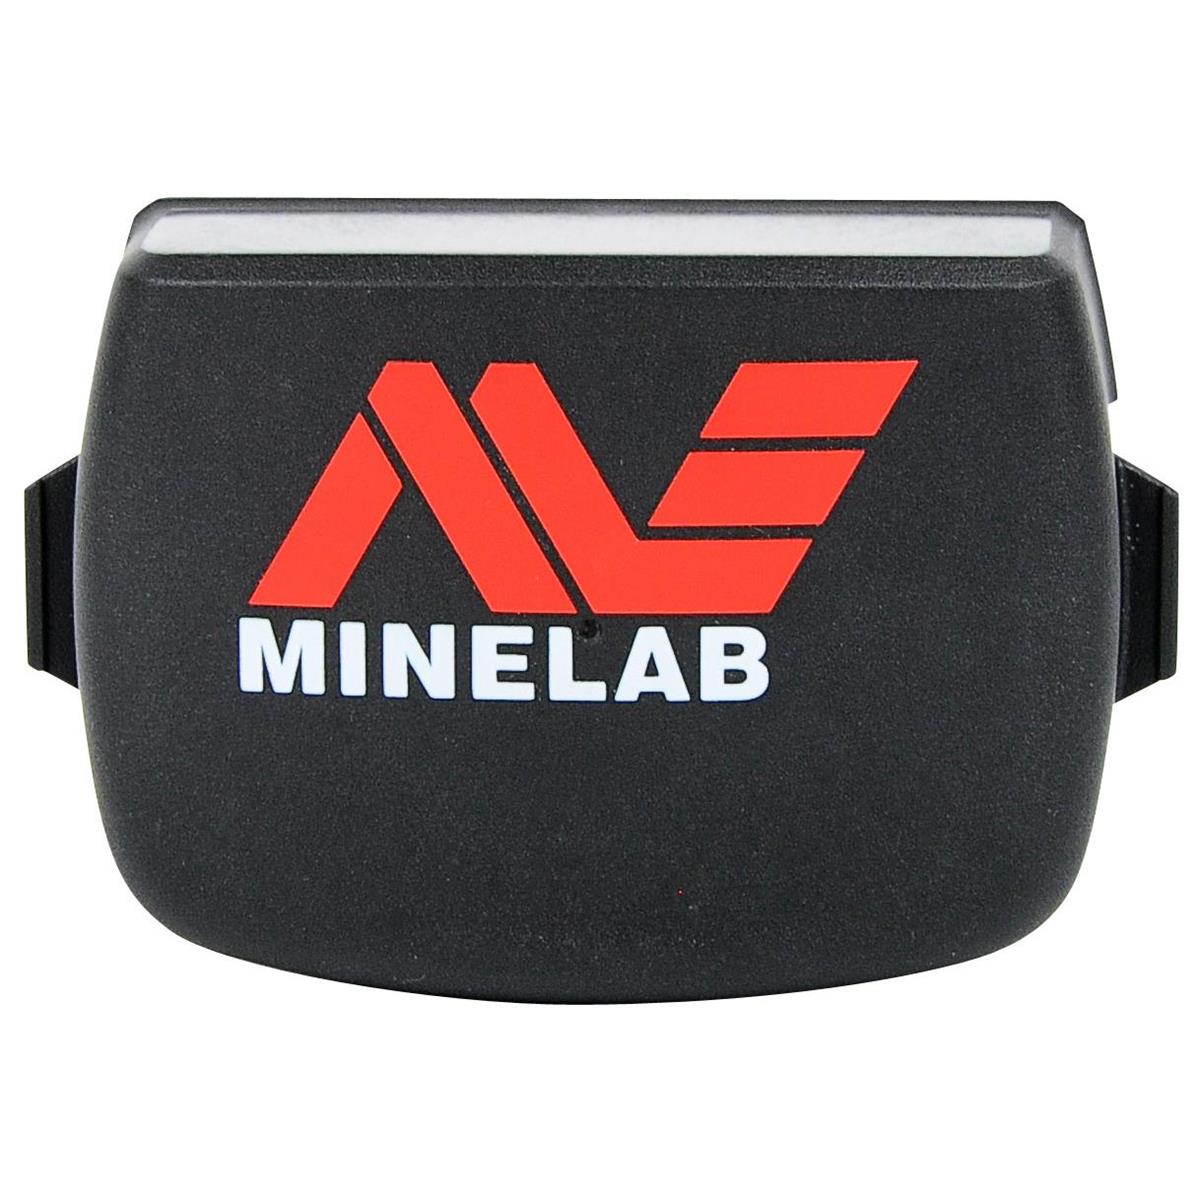 

Minelab 4.0V 4Ah Lithium-Ion Battery for CTX 3030 Metal Detector